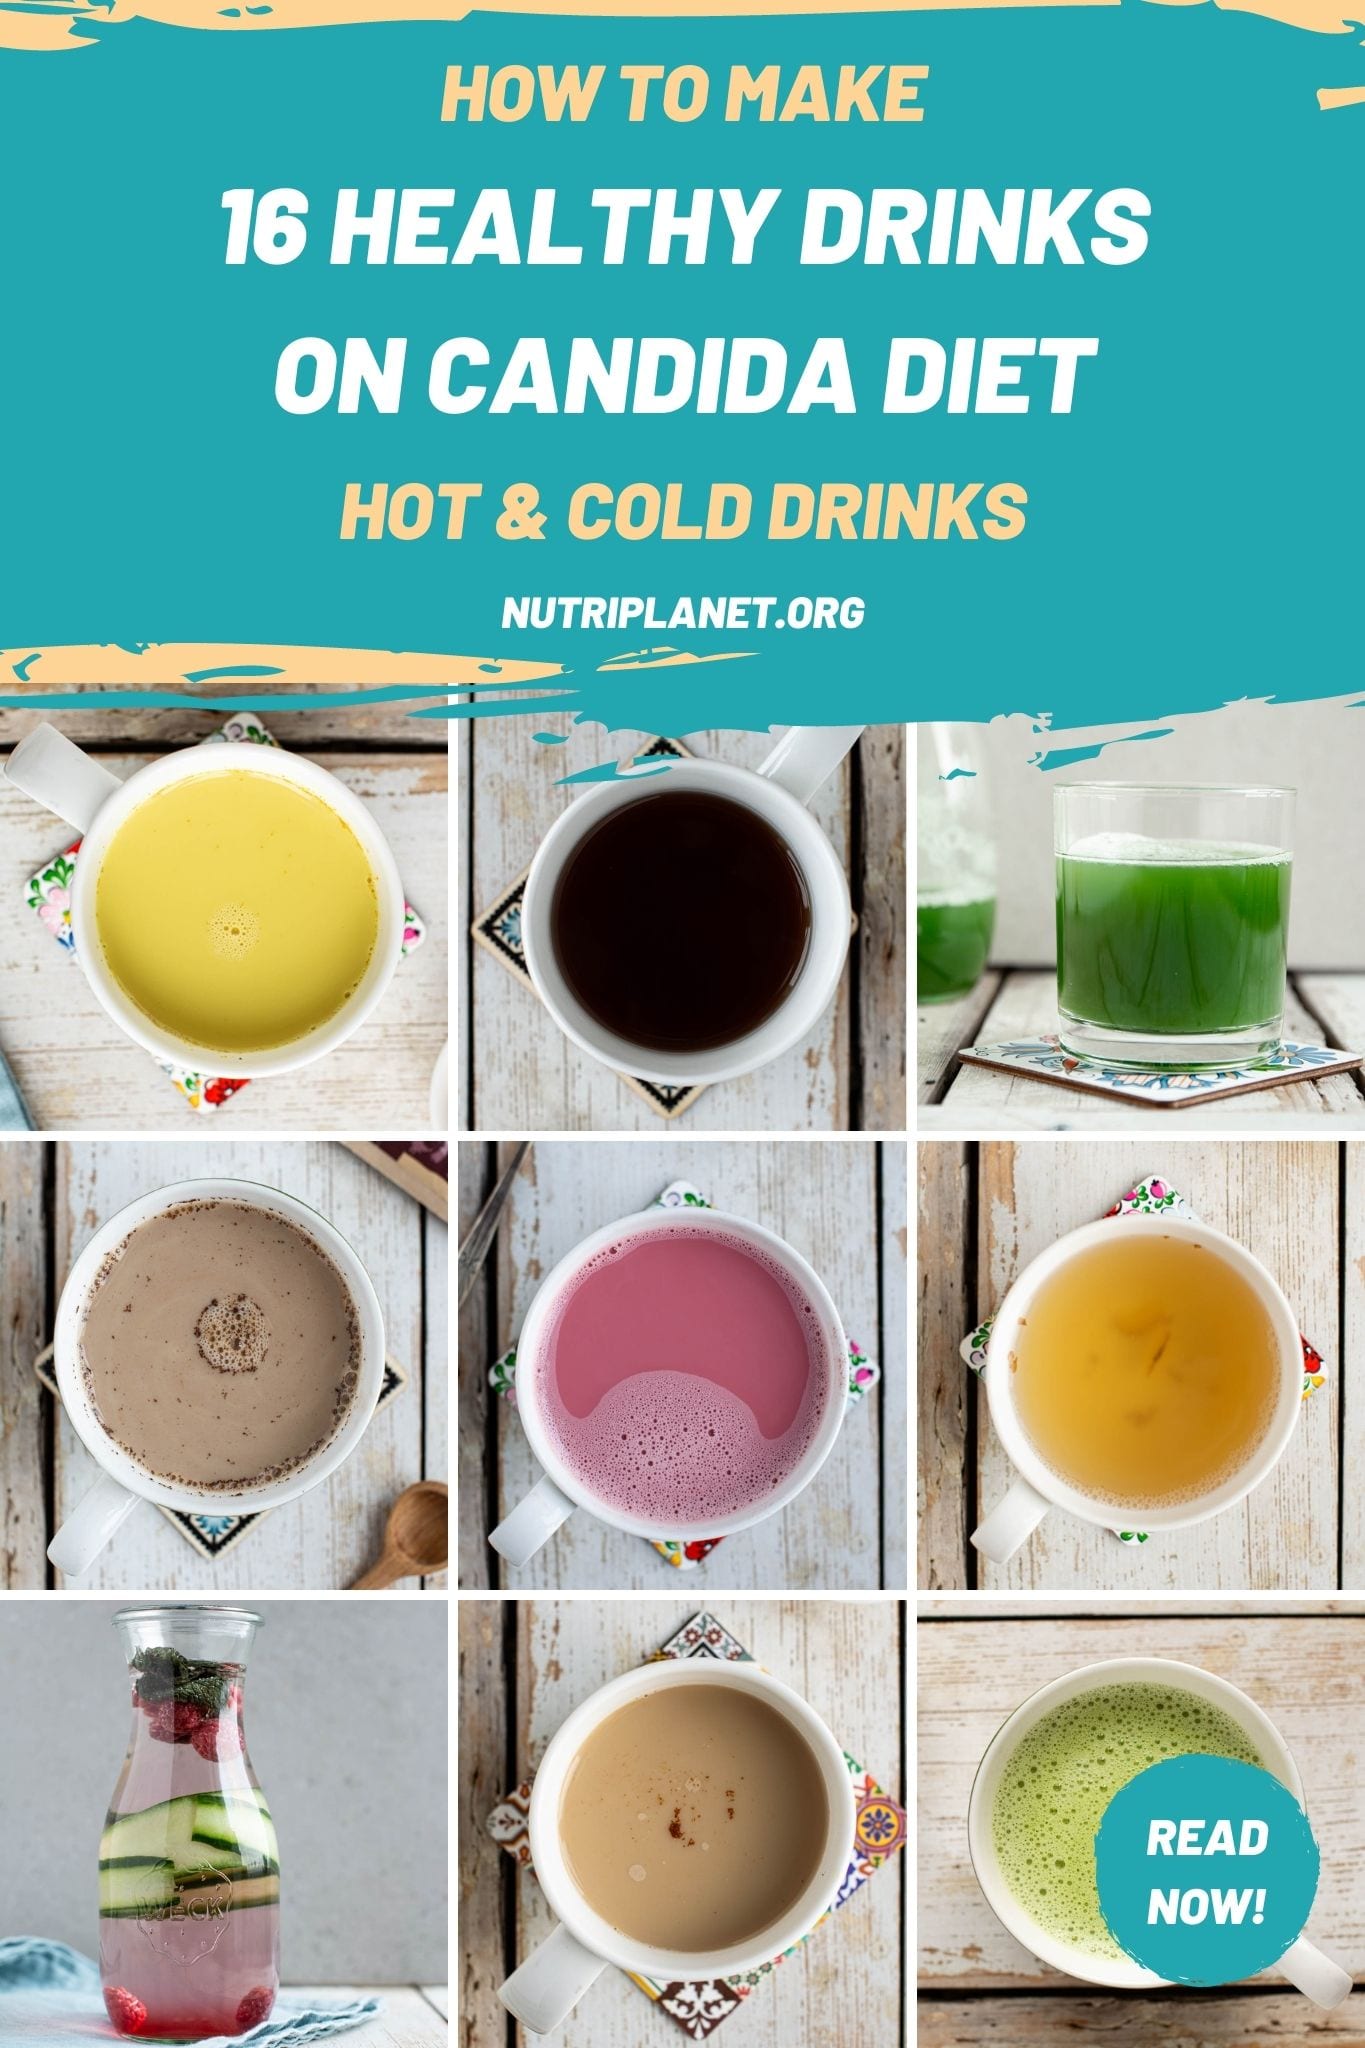 Learn how to make hot and cold healthy drinks on Candida diet that taste delicious and nourish your body. 